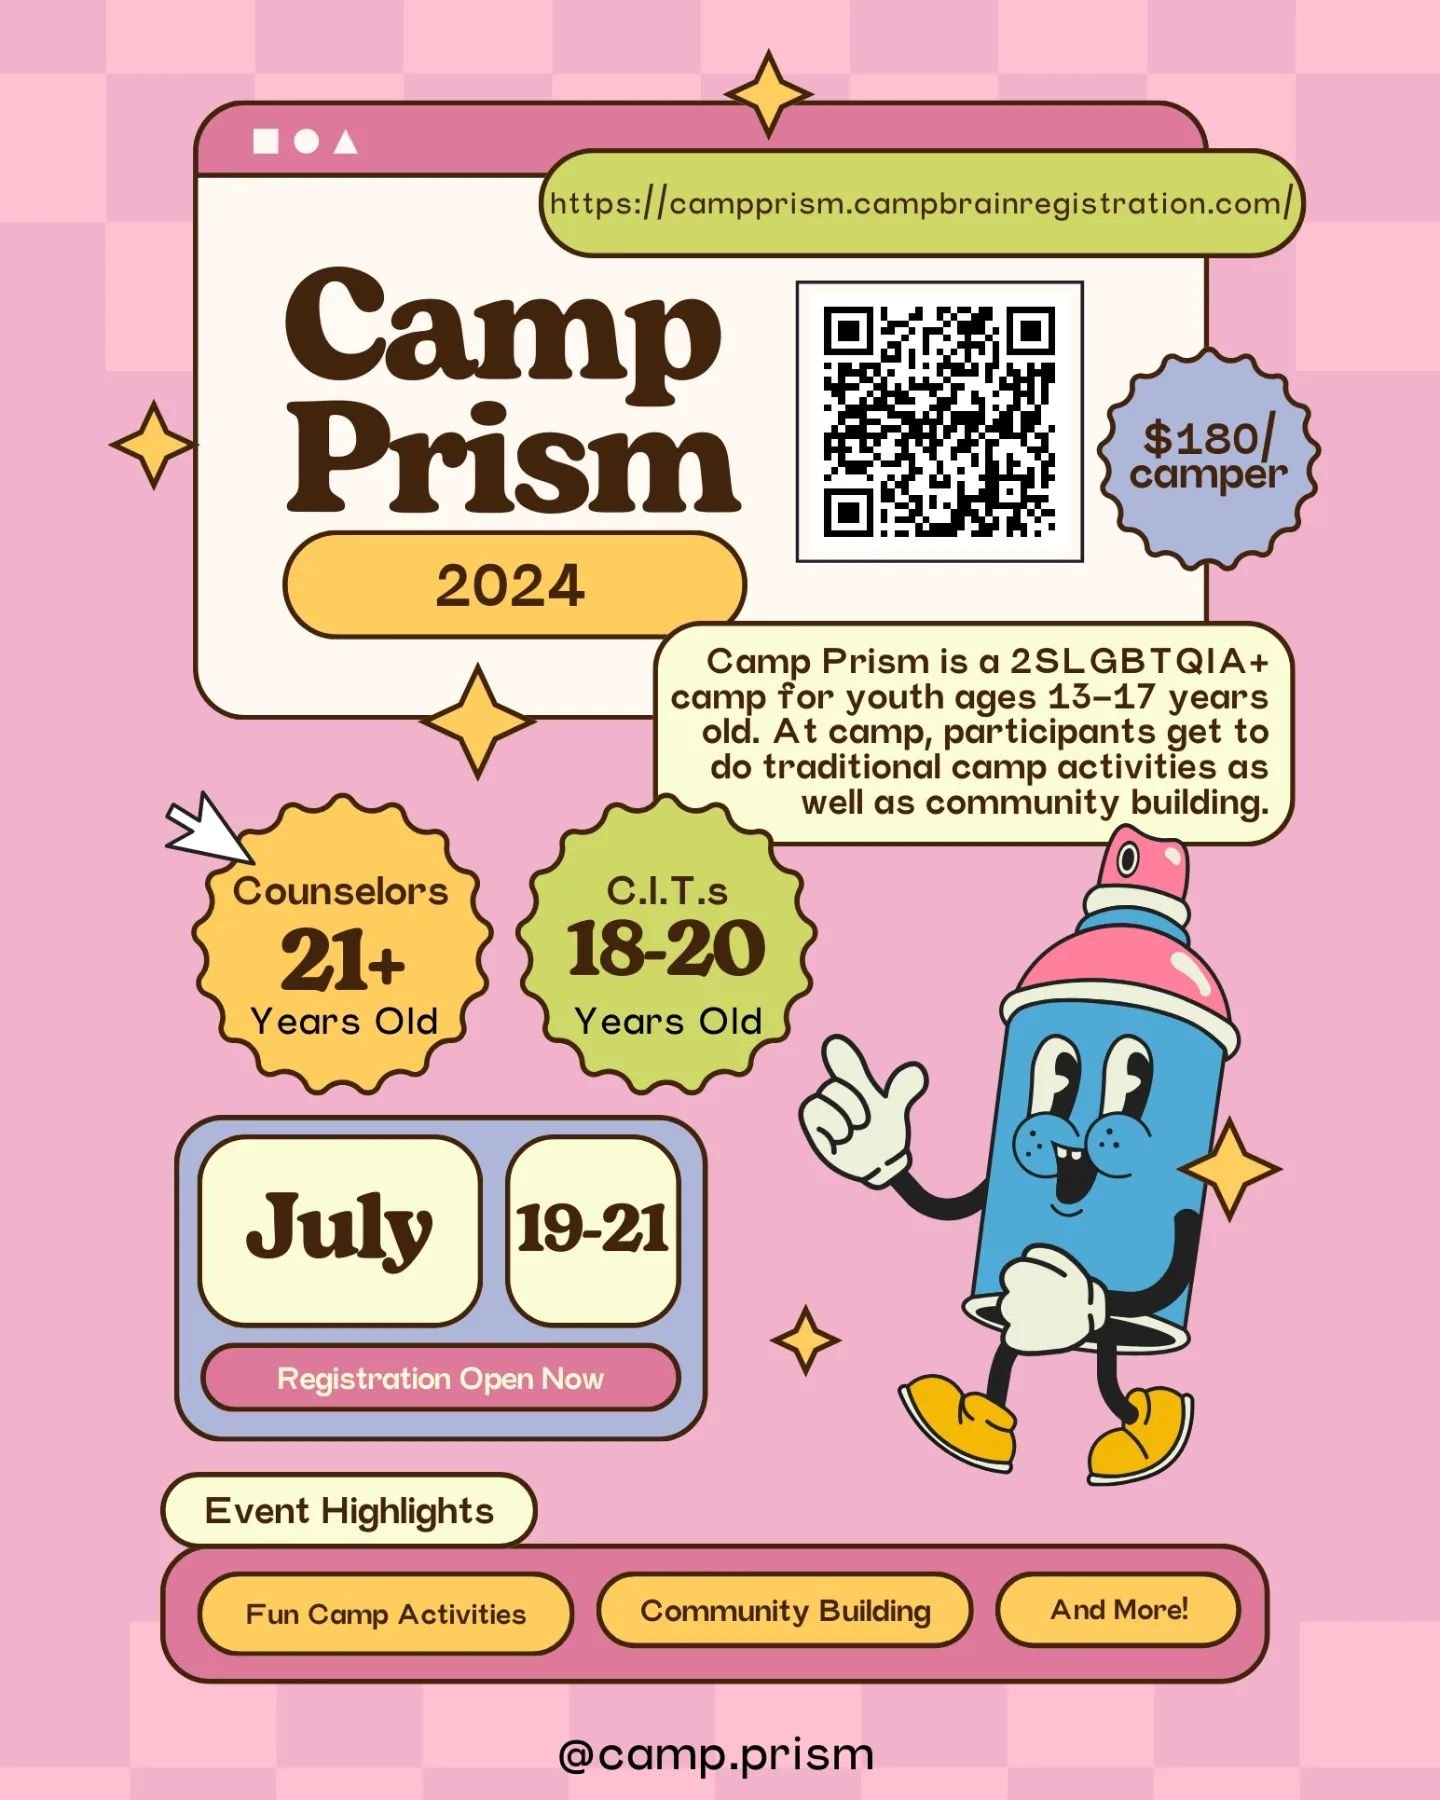 Our friends at @camp.prism are creating a community centered camp experience for 2SLGBTQIA+ youth, ages 13-17, in Oklahoma. Learn more over at their Instagram page, @camp.prism, and register for the July 19-21 camp at https://campprism.campbrainregis